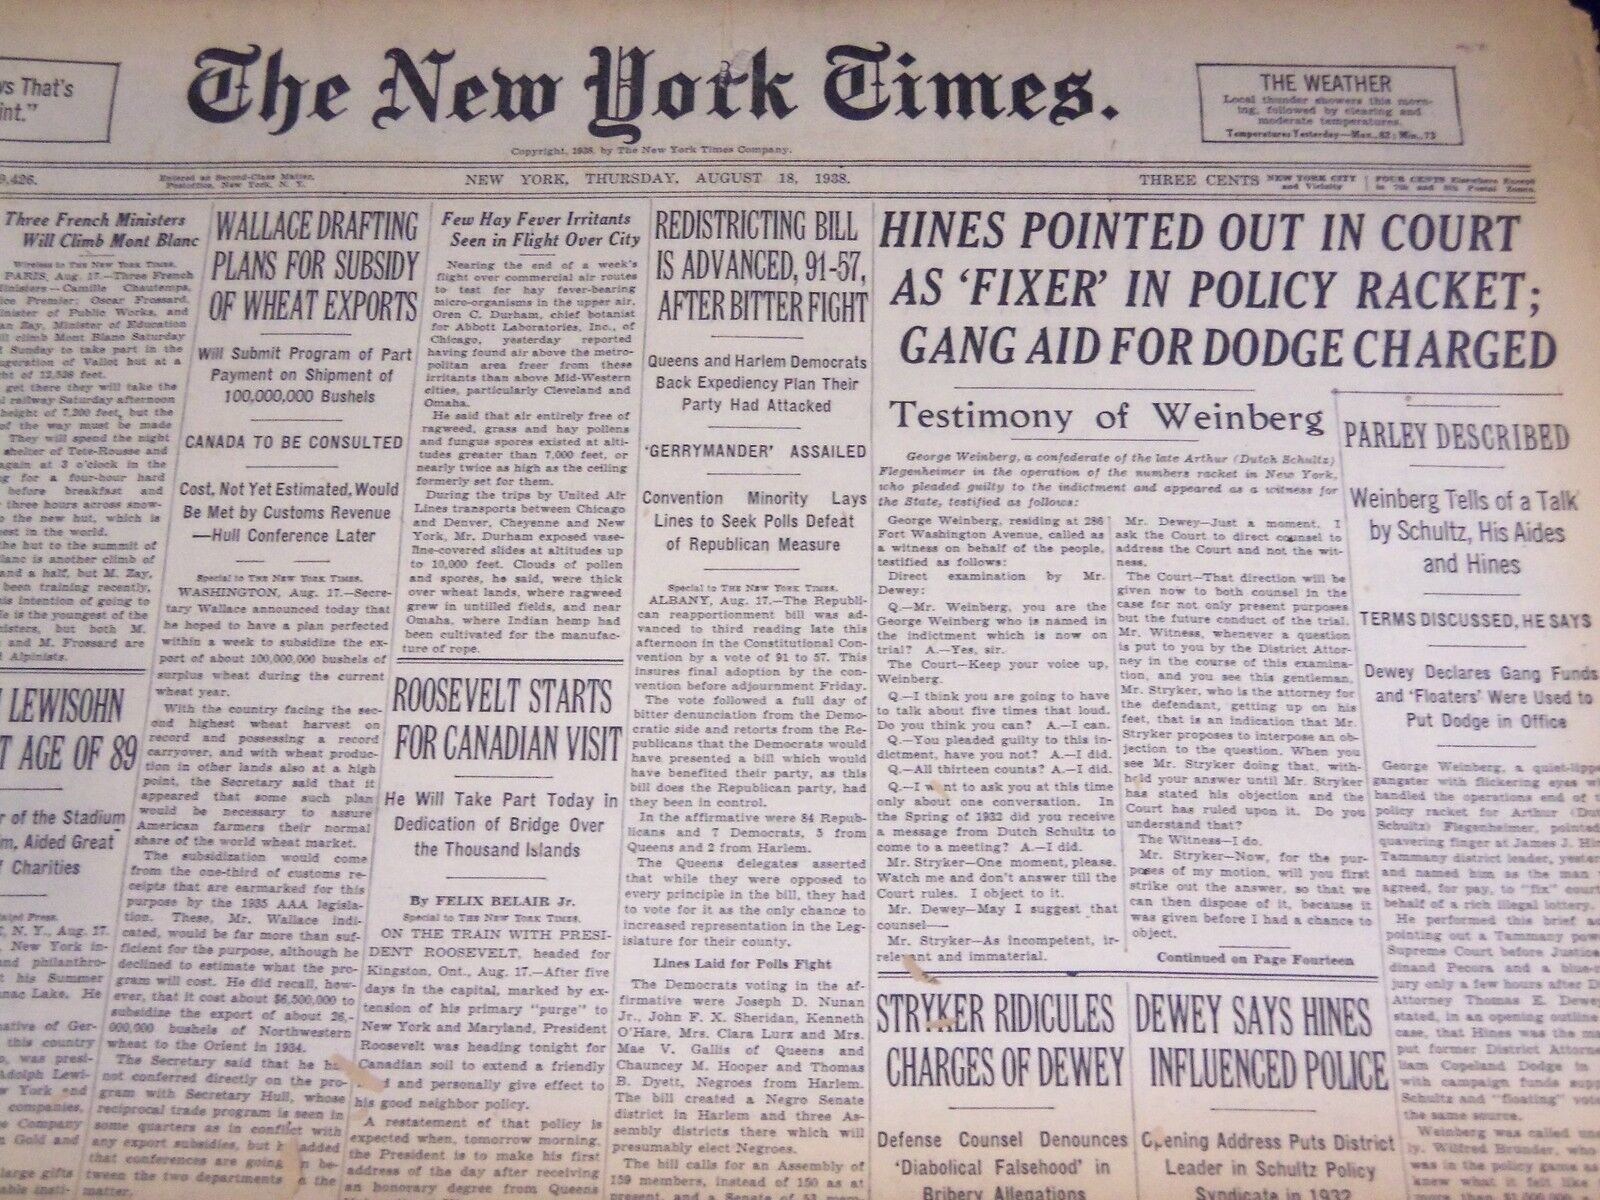 1938 AUG 18 NEW YORK TIMES - HINES POINTED OUT IN COURT AS FIXER - NT 2475